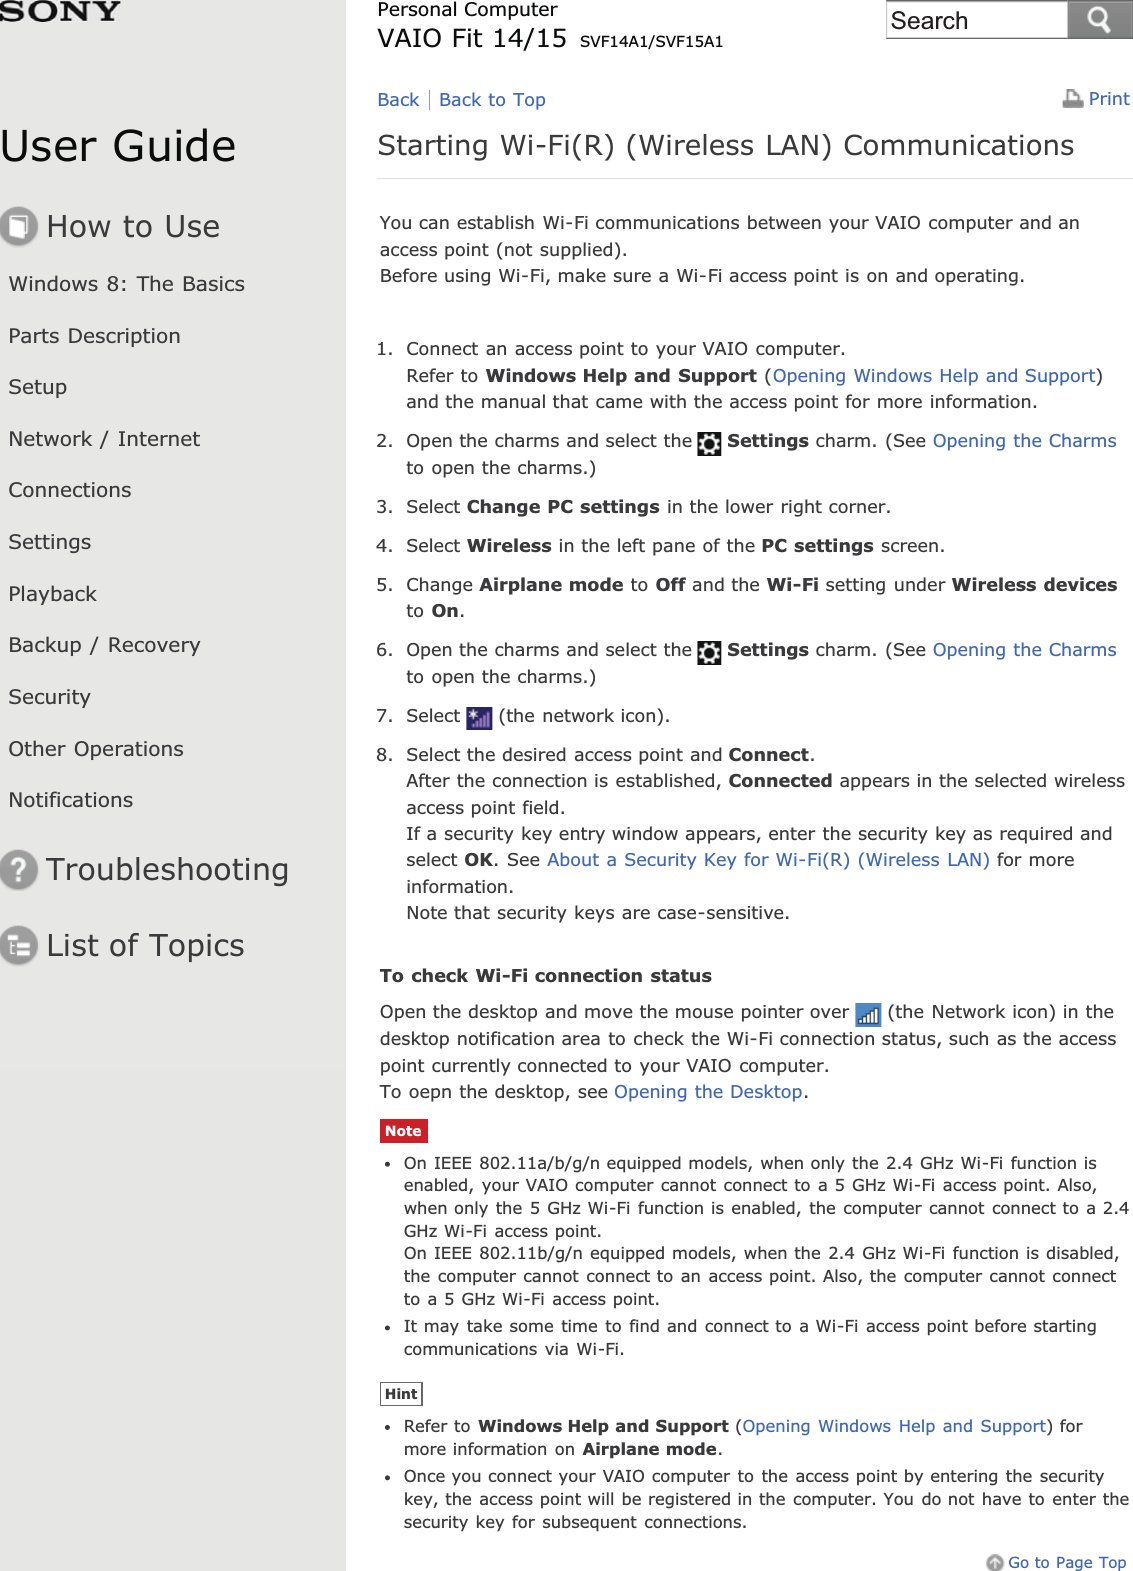 User GuideHow to UseWindows 8: The BasicsParts DescriptionSetupNetwork / InternetConnectionsSettingsPlaybackBackup / RecoverySecurityOther OperationsNotificationsTroubleshootingList of TopicsPrintPersonal ComputerVAIO Fit 14/15 SVF14A1/SVF15A1Starting Wi-Fi(R) (Wireless LAN) CommunicationsYou can establish Wi-Fi communications between your VAIO computer and anaccess point (not supplied).Before using Wi-Fi, make sure a Wi-Fi access point is on and operating.1. Connect an access point to your VAIO computer.Refer to Windows Help and Support (Opening Windows Help and Support)and the manual that came with the access point for more information.2. Open the charms and select the Settings charm. (See Opening the Charmsto open the charms.)3. Select Change PC settings in the lower right corner.4. Select Wireless in the left pane of the PC settings screen.5. Change Airplane mode to Off and the Wi-Fi setting under Wireless devicesto On.6. Open the charms and select the Settings charm. (See Opening the Charmsto open the charms.)7. Select (the network icon).8. Select the desired access point and Connect.After the connection is established, Connected appears in the selected wirelessaccess point field.If a security key entry window appears, enter the security key as required andselect OK. See About a Security Key for Wi-Fi(R) (Wireless LAN) for moreinformation.Note that security keys are case-sensitive.To check Wi-Fi connection statusOpen the desktop and move the mouse pointer over (the Network icon) in thedesktop notification area to check the Wi-Fi connection status, such as the accesspoint currently connected to your VAIO computer.To oepn the desktop, see Opening the Desktop.NoteOn IEEE 802.11a/b/g/n equipped models, when only the 2.4 GHz Wi-Fi function isenabled, your VAIO computer cannot connect to a 5 GHz Wi-Fi access point. Also,when only the 5 GHz Wi-Fi function is enabled, the computer cannot connect to a 2.4GHz Wi-Fi access point.On IEEE 802.11b/g/n equipped models, when the 2.4 GHz Wi-Fi function is disabled,the computer cannot connect to an access point. Also, the computer cannot connectto a 5 GHz Wi-Fi access point.It may take some time to find and connect to a Wi-Fi access point before startingcommunications via Wi-Fi.HintRefer to Windows Help and Support (Opening Windows Help and Support) formore information on Airplane mode.Once you connect your VAIO computer to the access point by entering the securitykey, the access point will be registered in the computer. You do not have to enter thesecurity key for subsequent connections.Go to Page TopBack Back to TopSearch